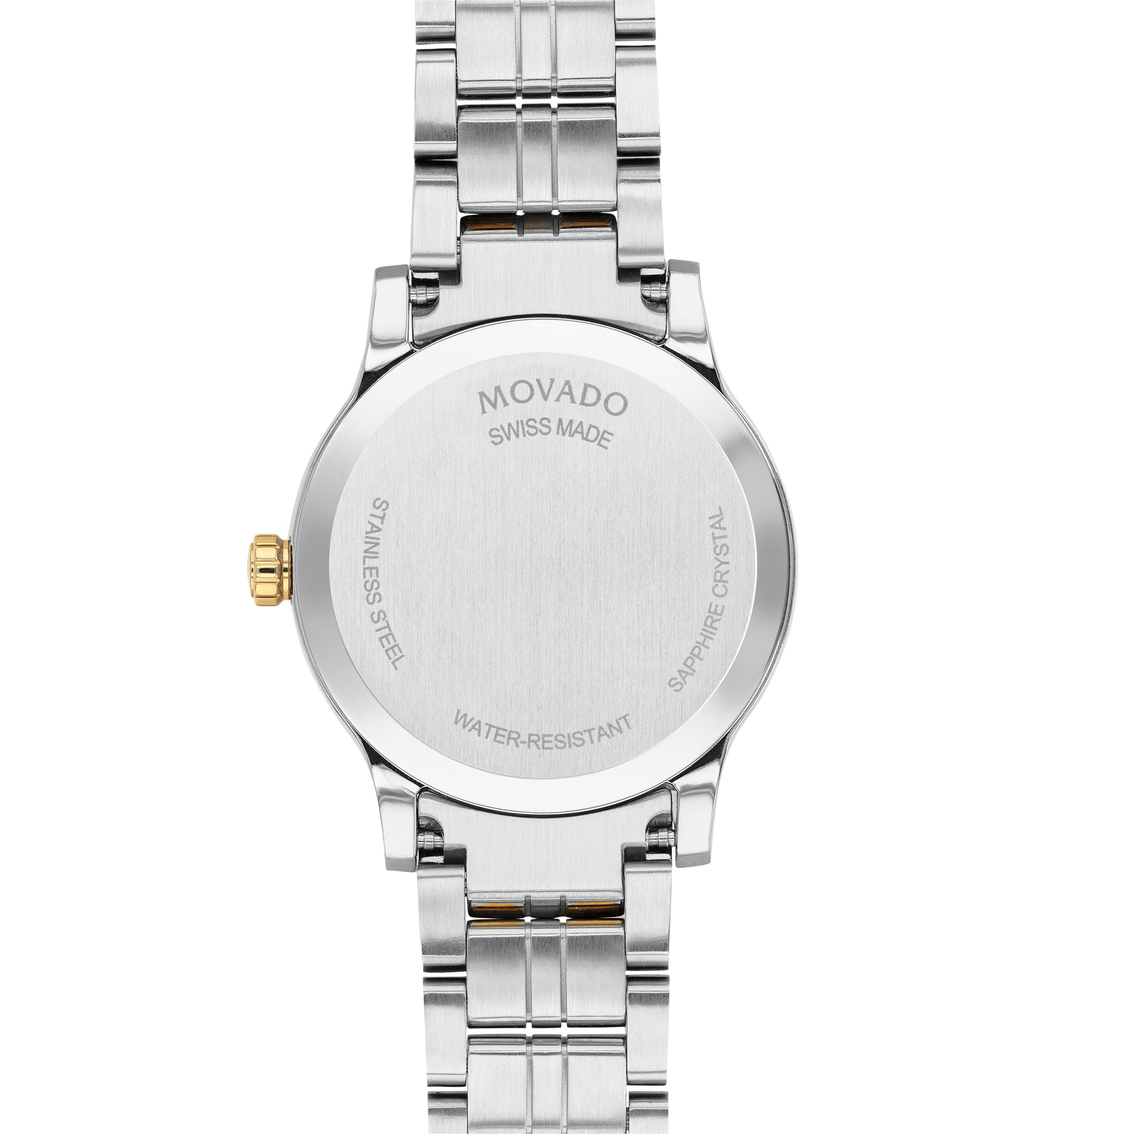 Movado Women's Military Special Watch 0607538 - Image 2 of 3